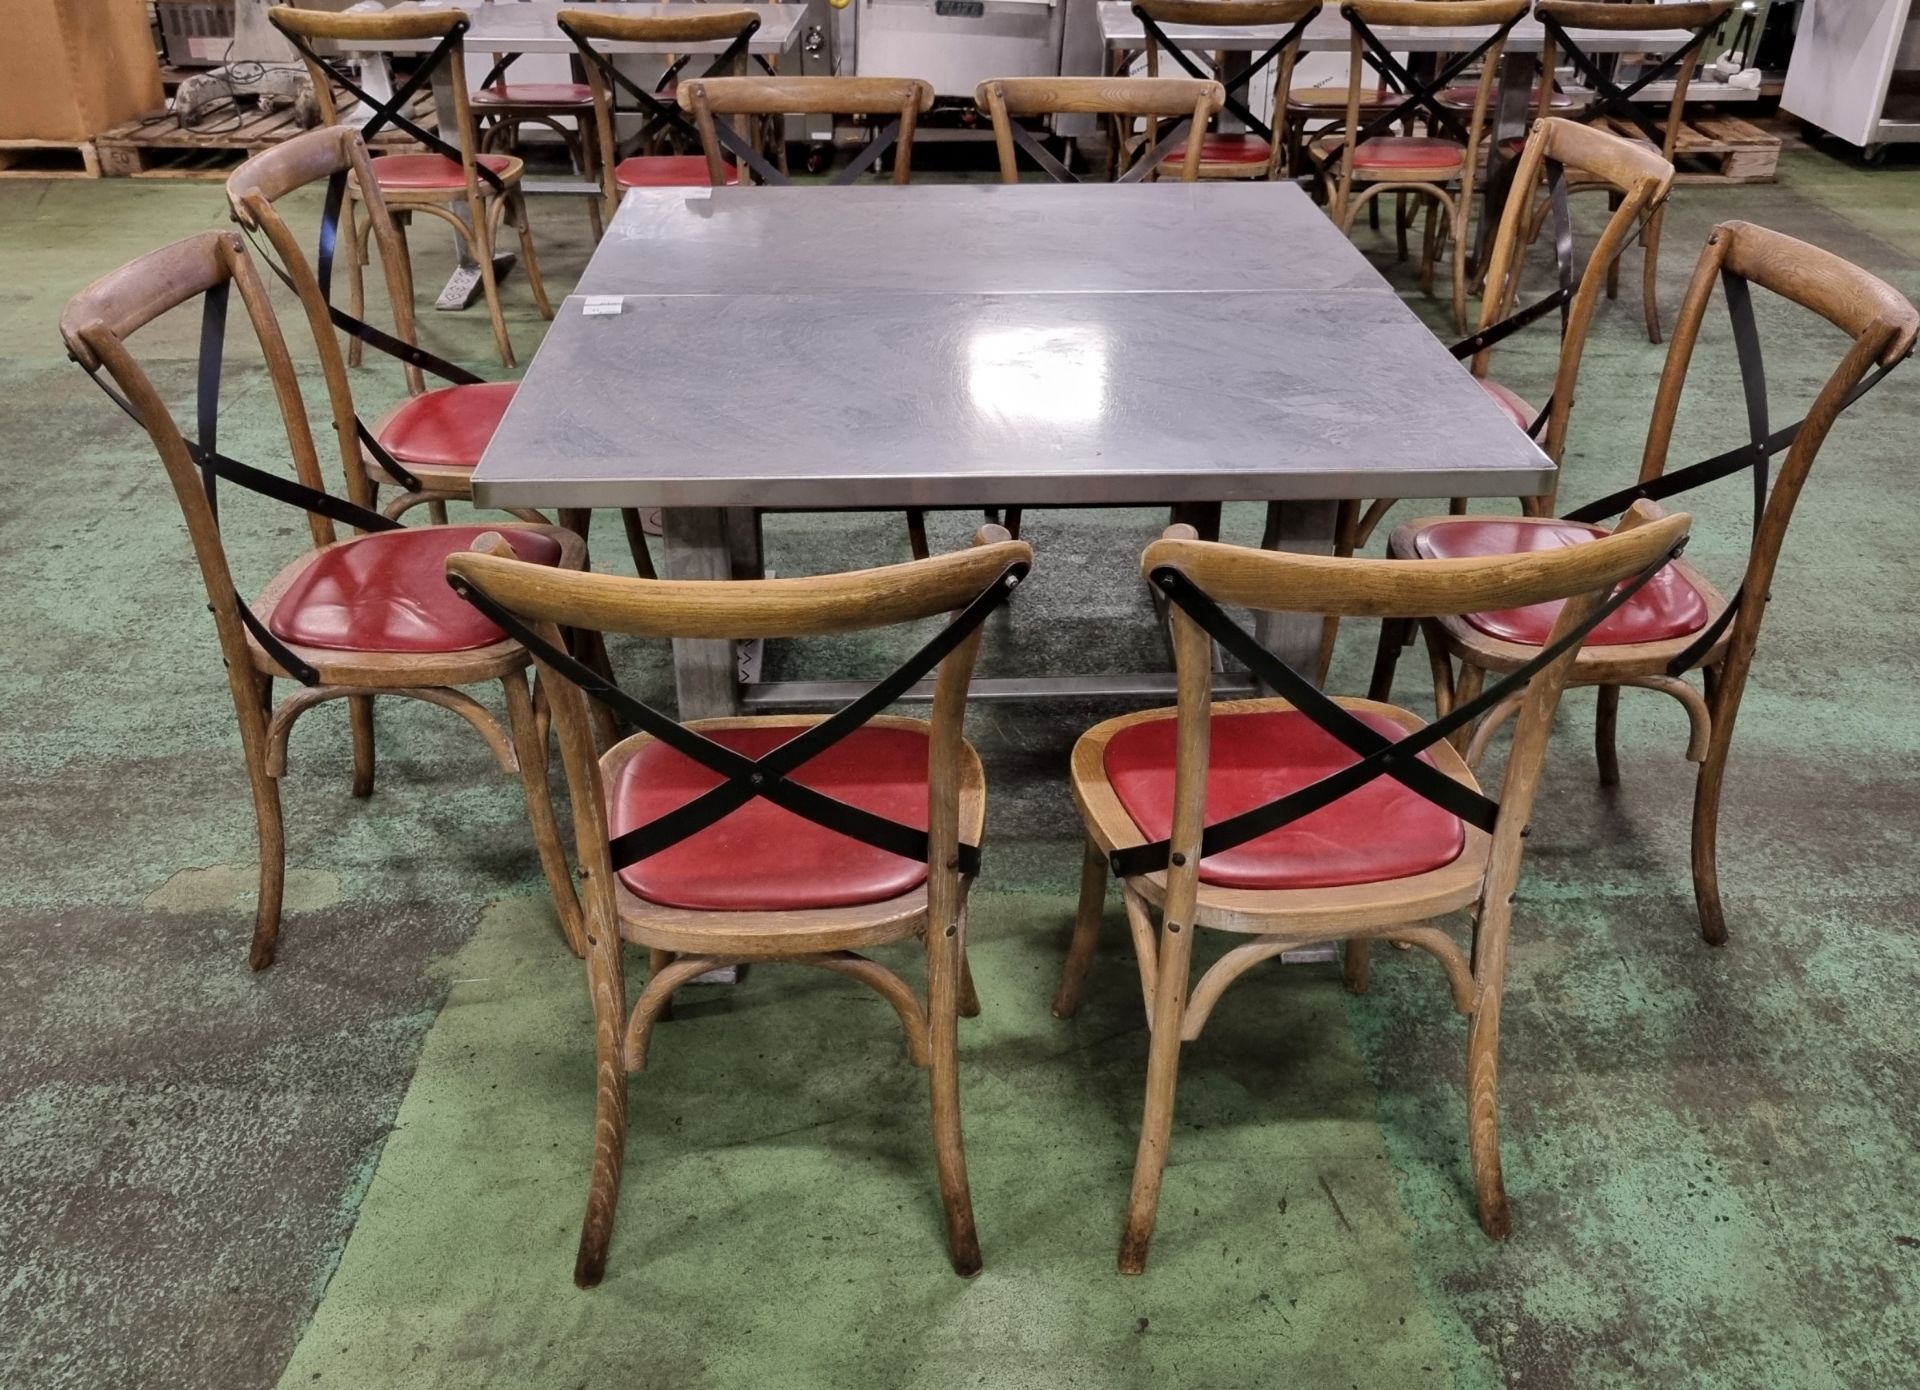 8x Wooden restaurant chairs, 2x Metal tables - W 1200 x D 690 x H 760 mm - Image 4 of 5